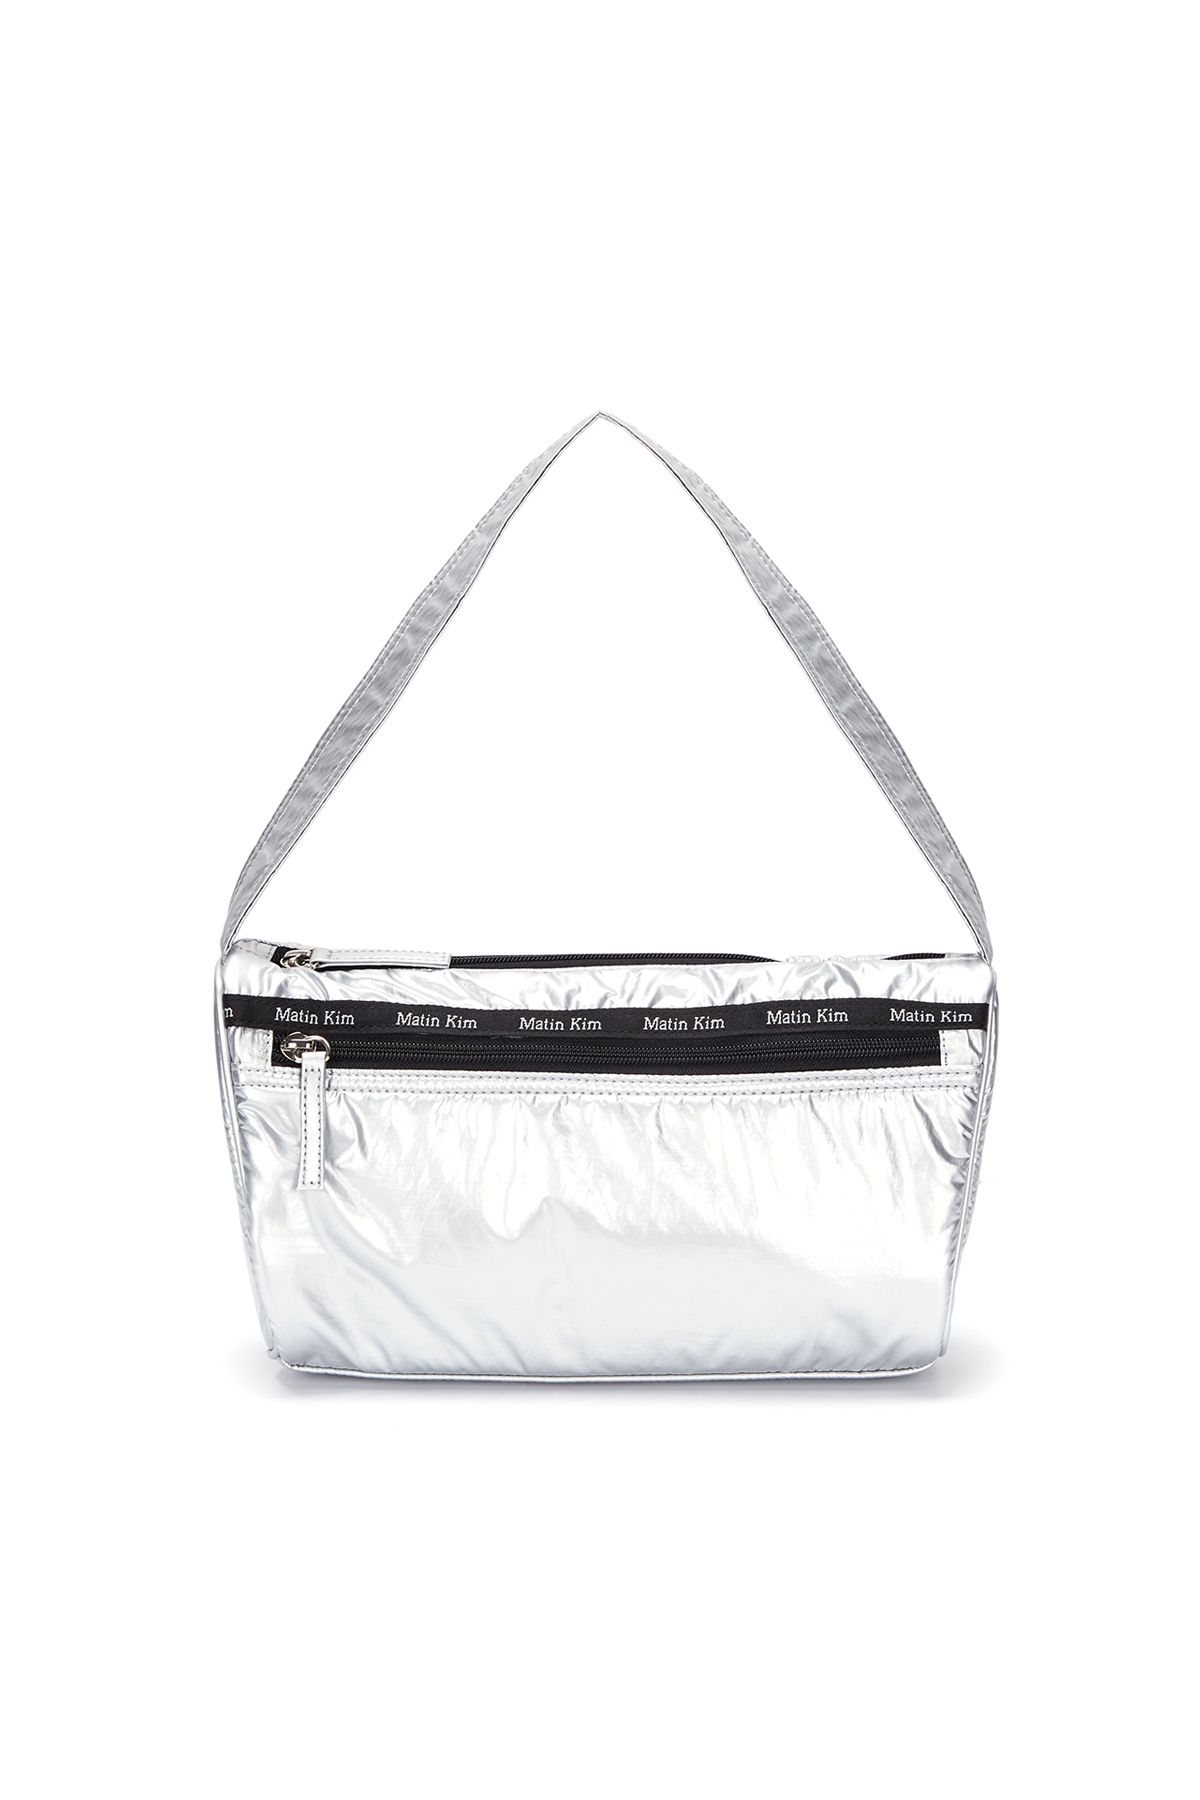 GLOSSY TOTE BAG IN SILVER